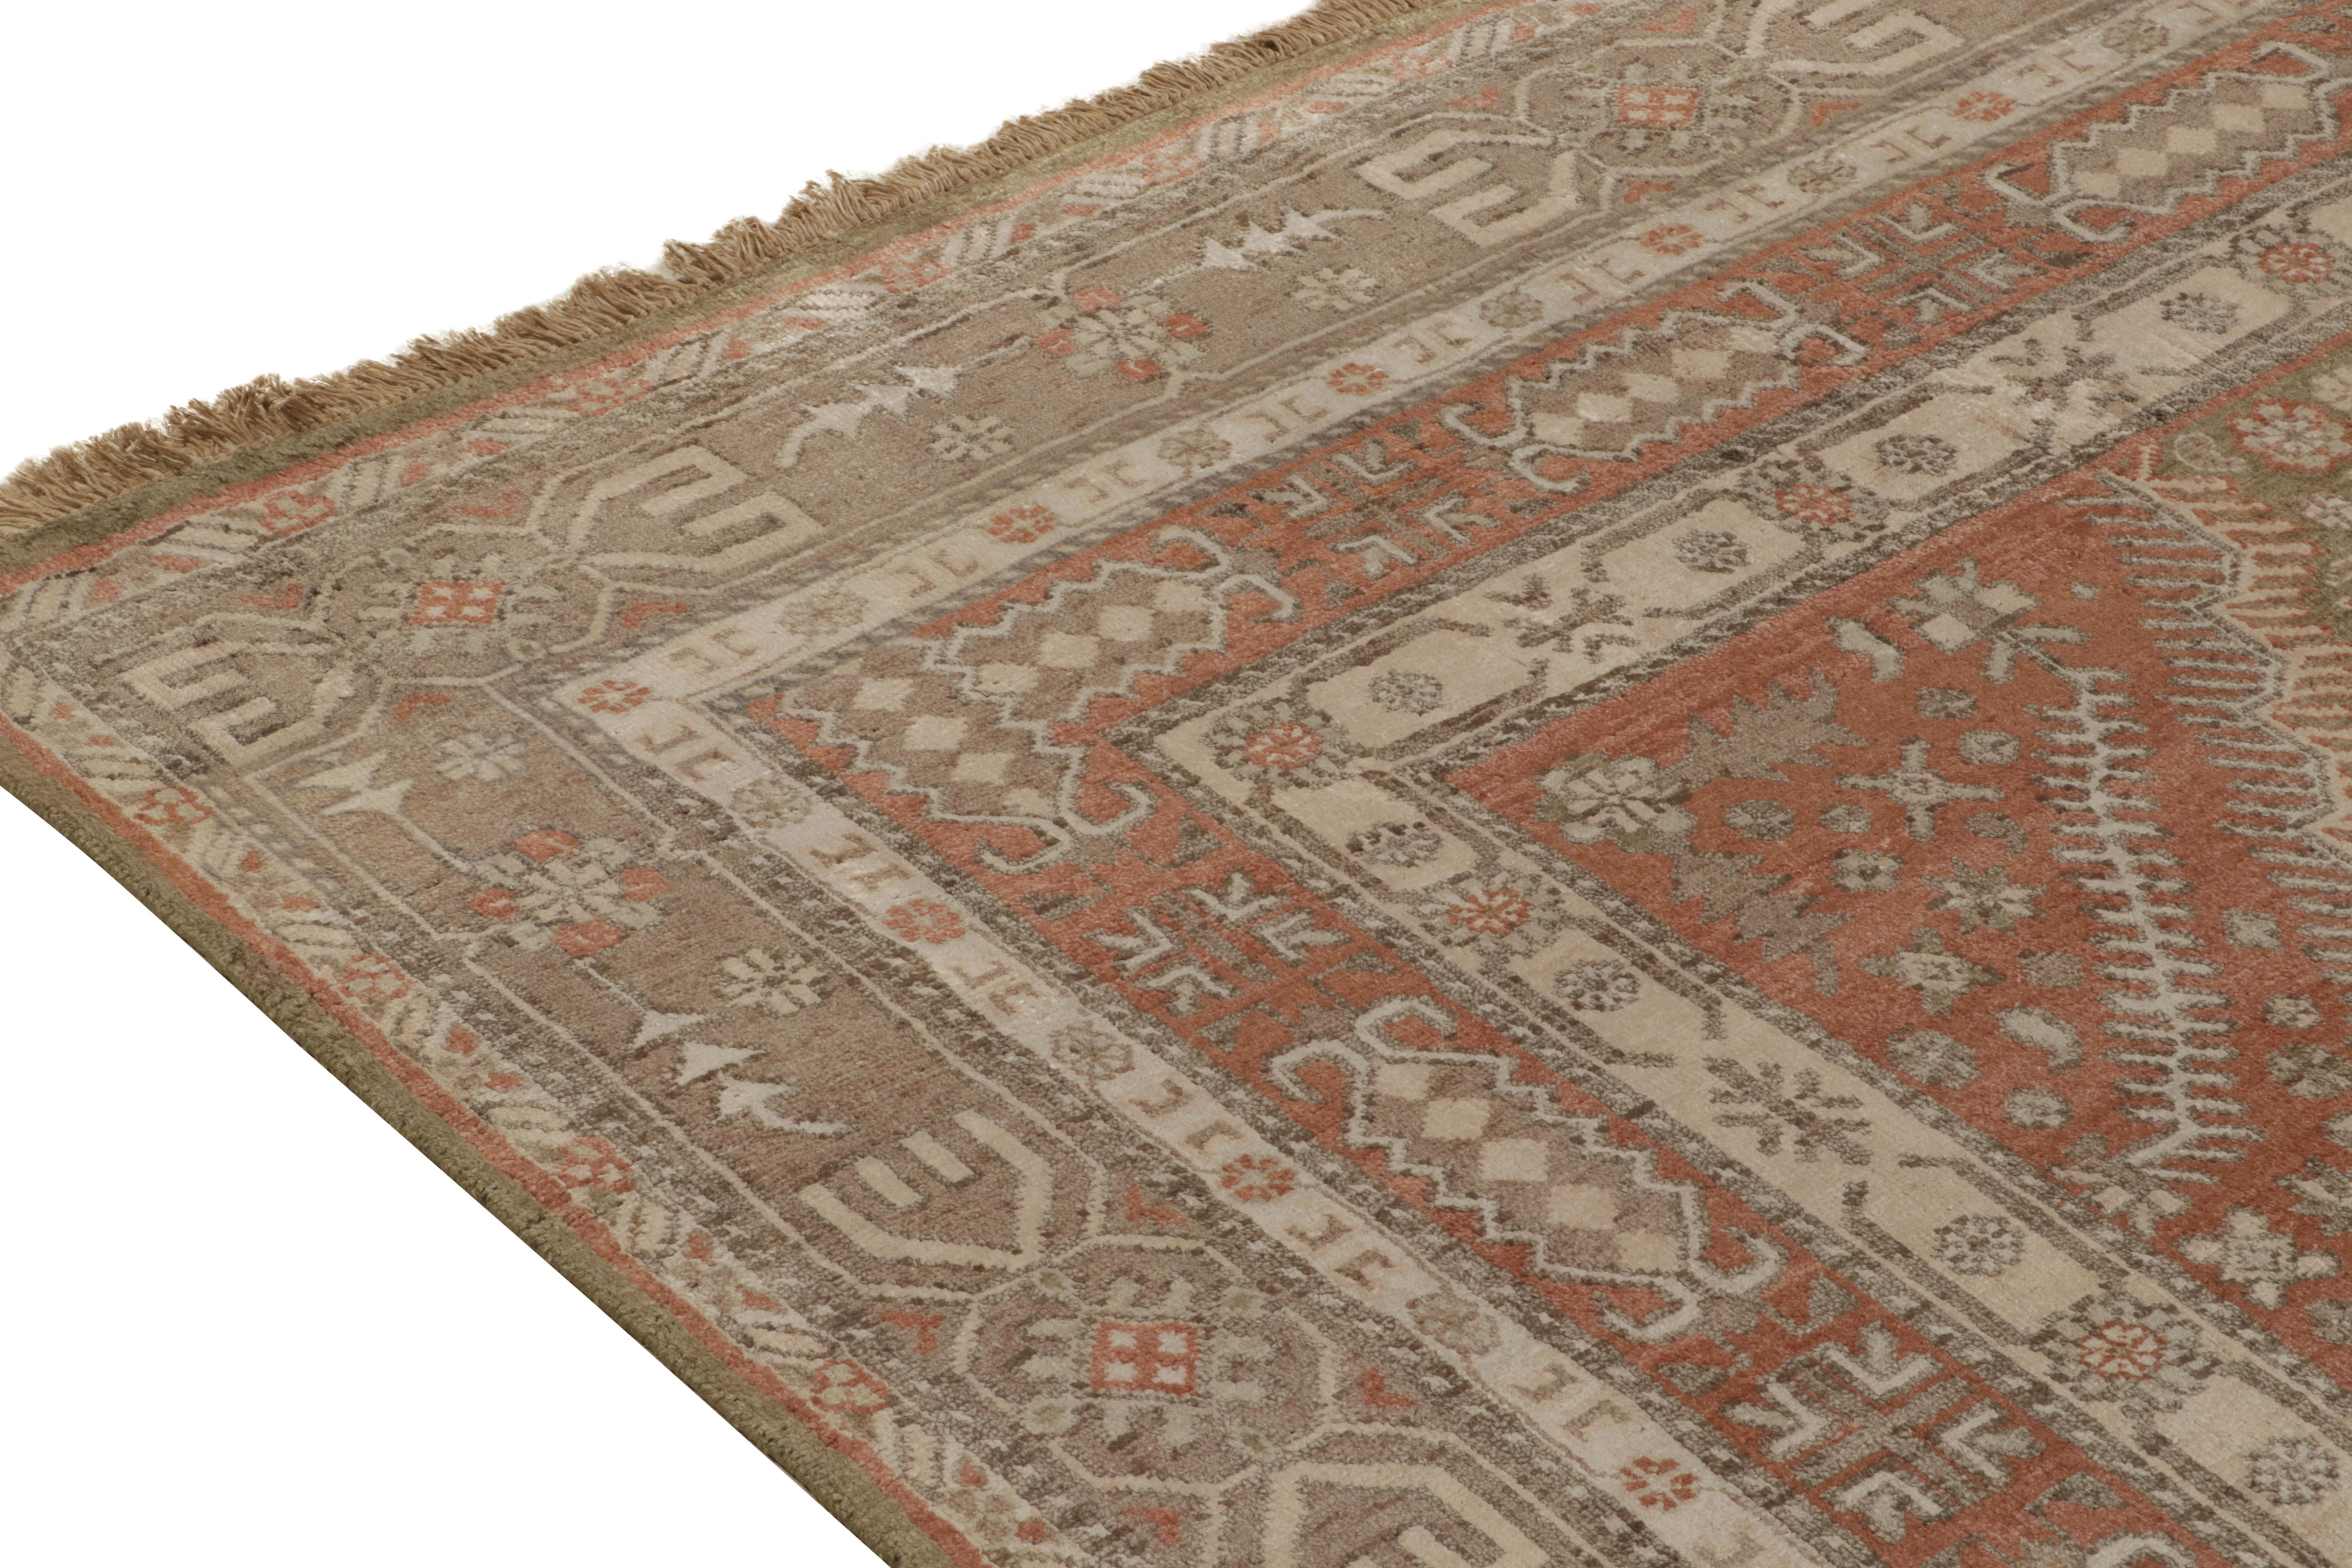 Rug & Kilim’s Classic Khotan Style Rug in Beige, Rust and Ivory Floral Patterns In New Condition For Sale In Long Island City, NY